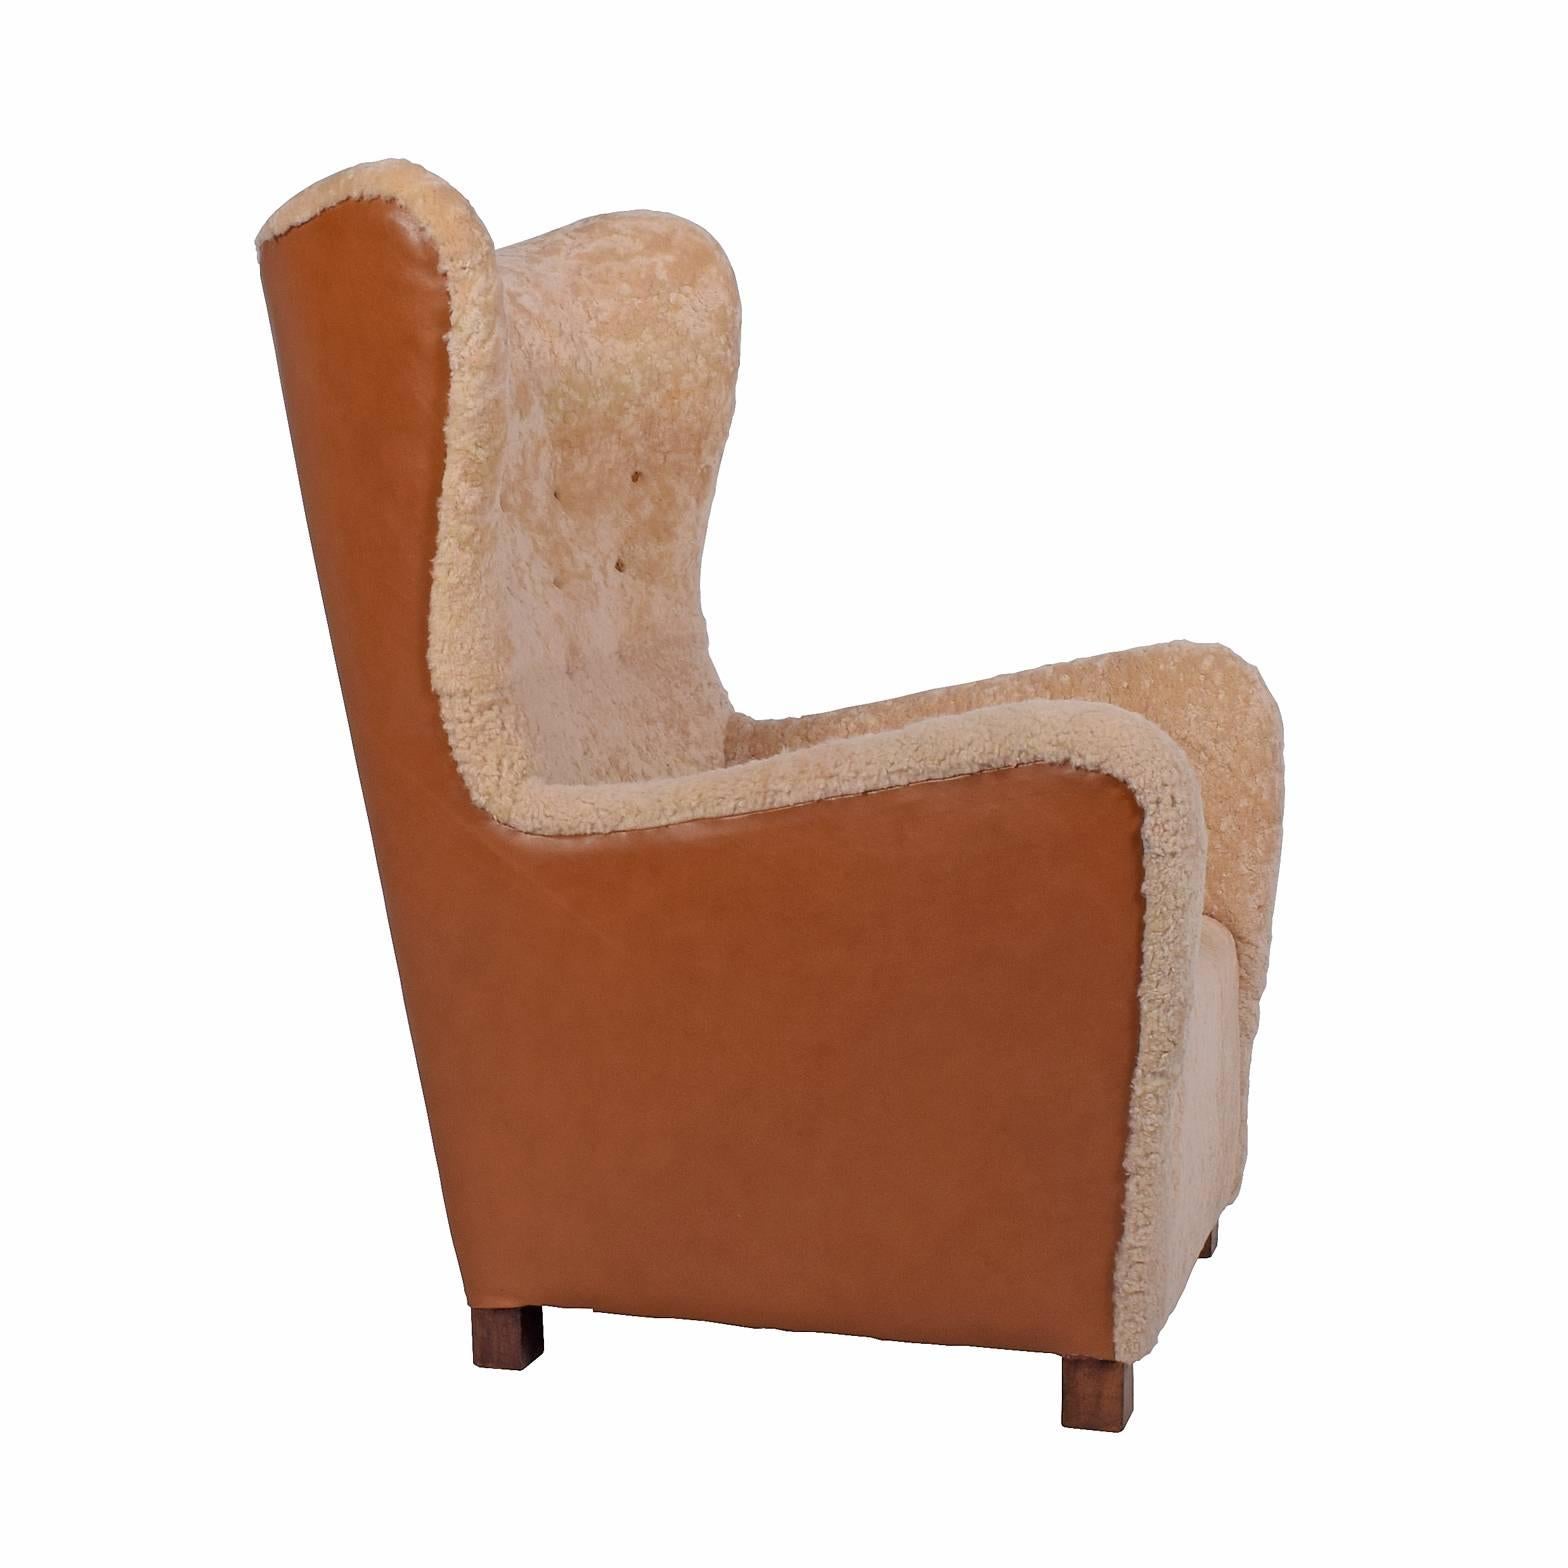 High back easy chair upholstered with leather on back and sheepskin on front with solid oak legs. In Fritz Hansen catalog from 1942.